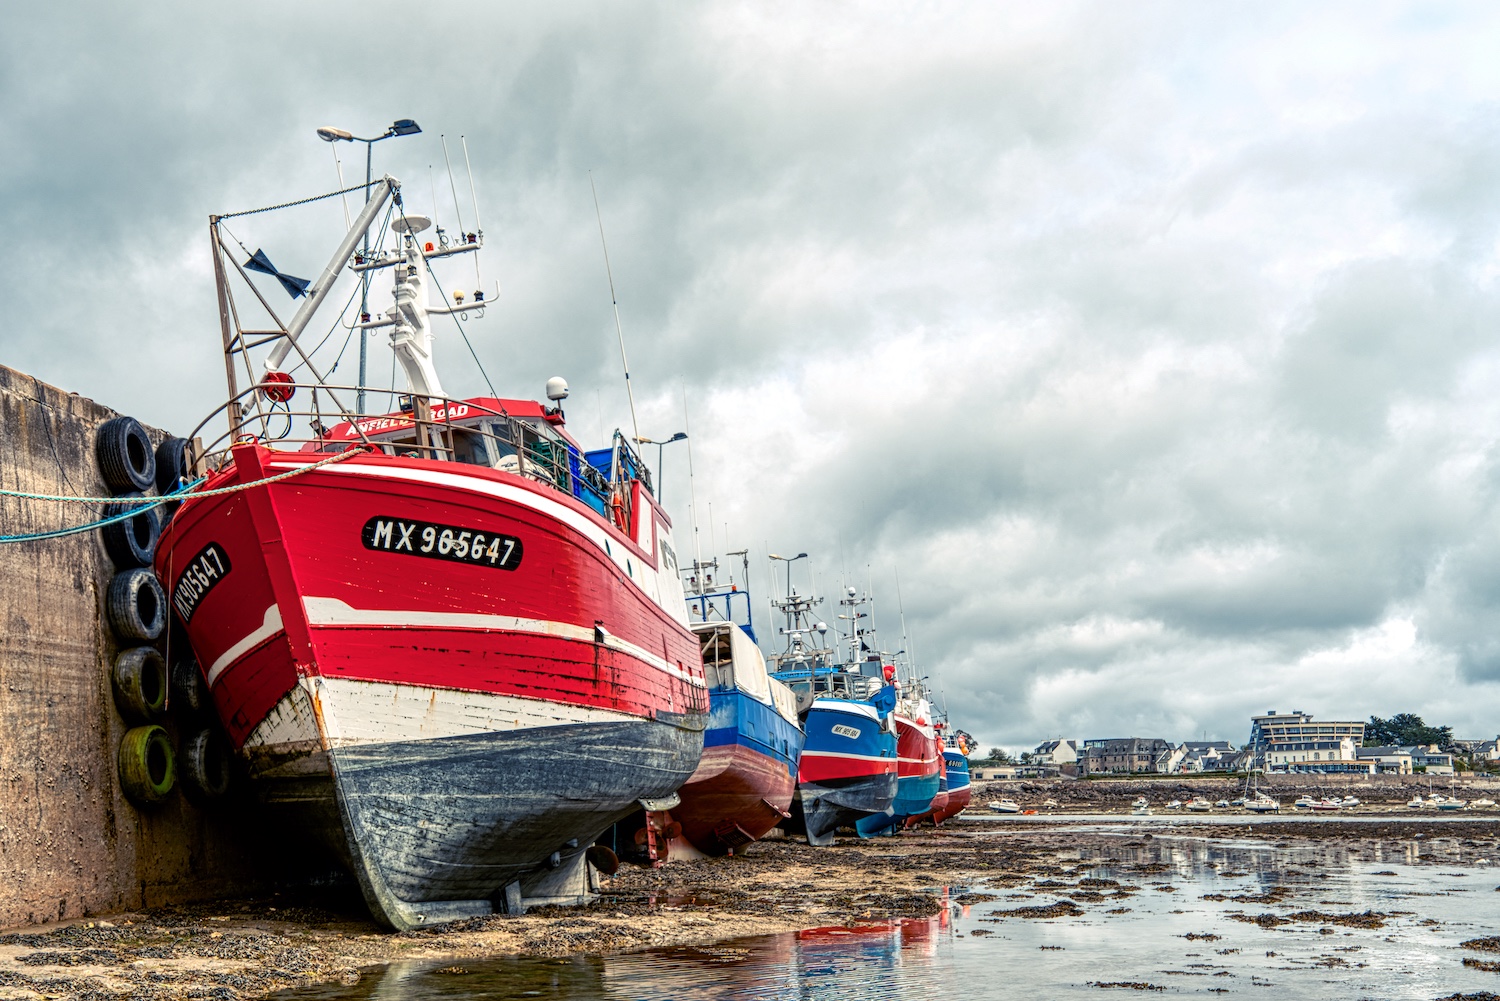 Fishing boats are waiting for the tide in the port of Roscoff